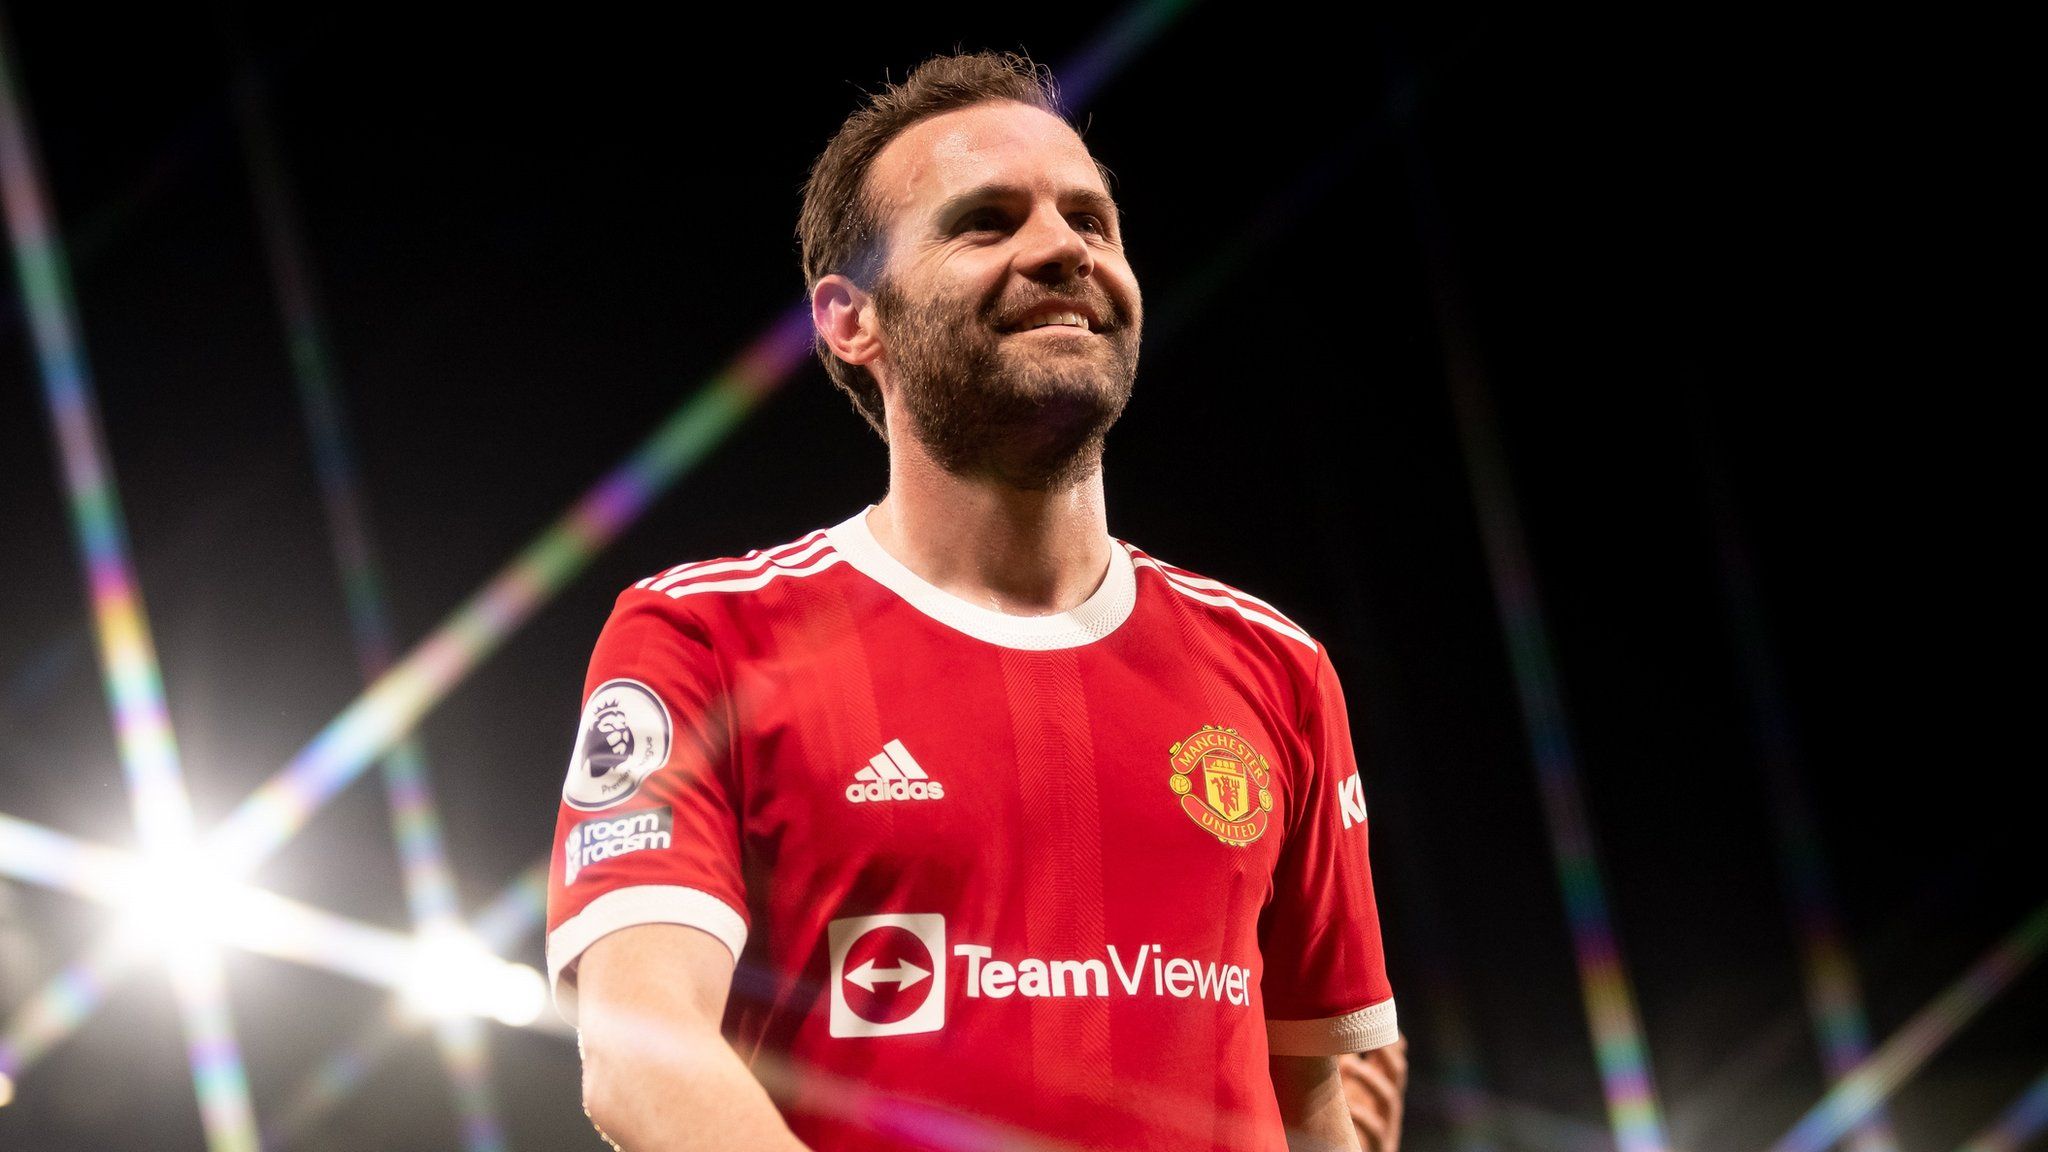 Juan Mata of Manchester United at the end of the Premier League match between Manchester United and Chelsea at Old Trafford on April 28, 2022